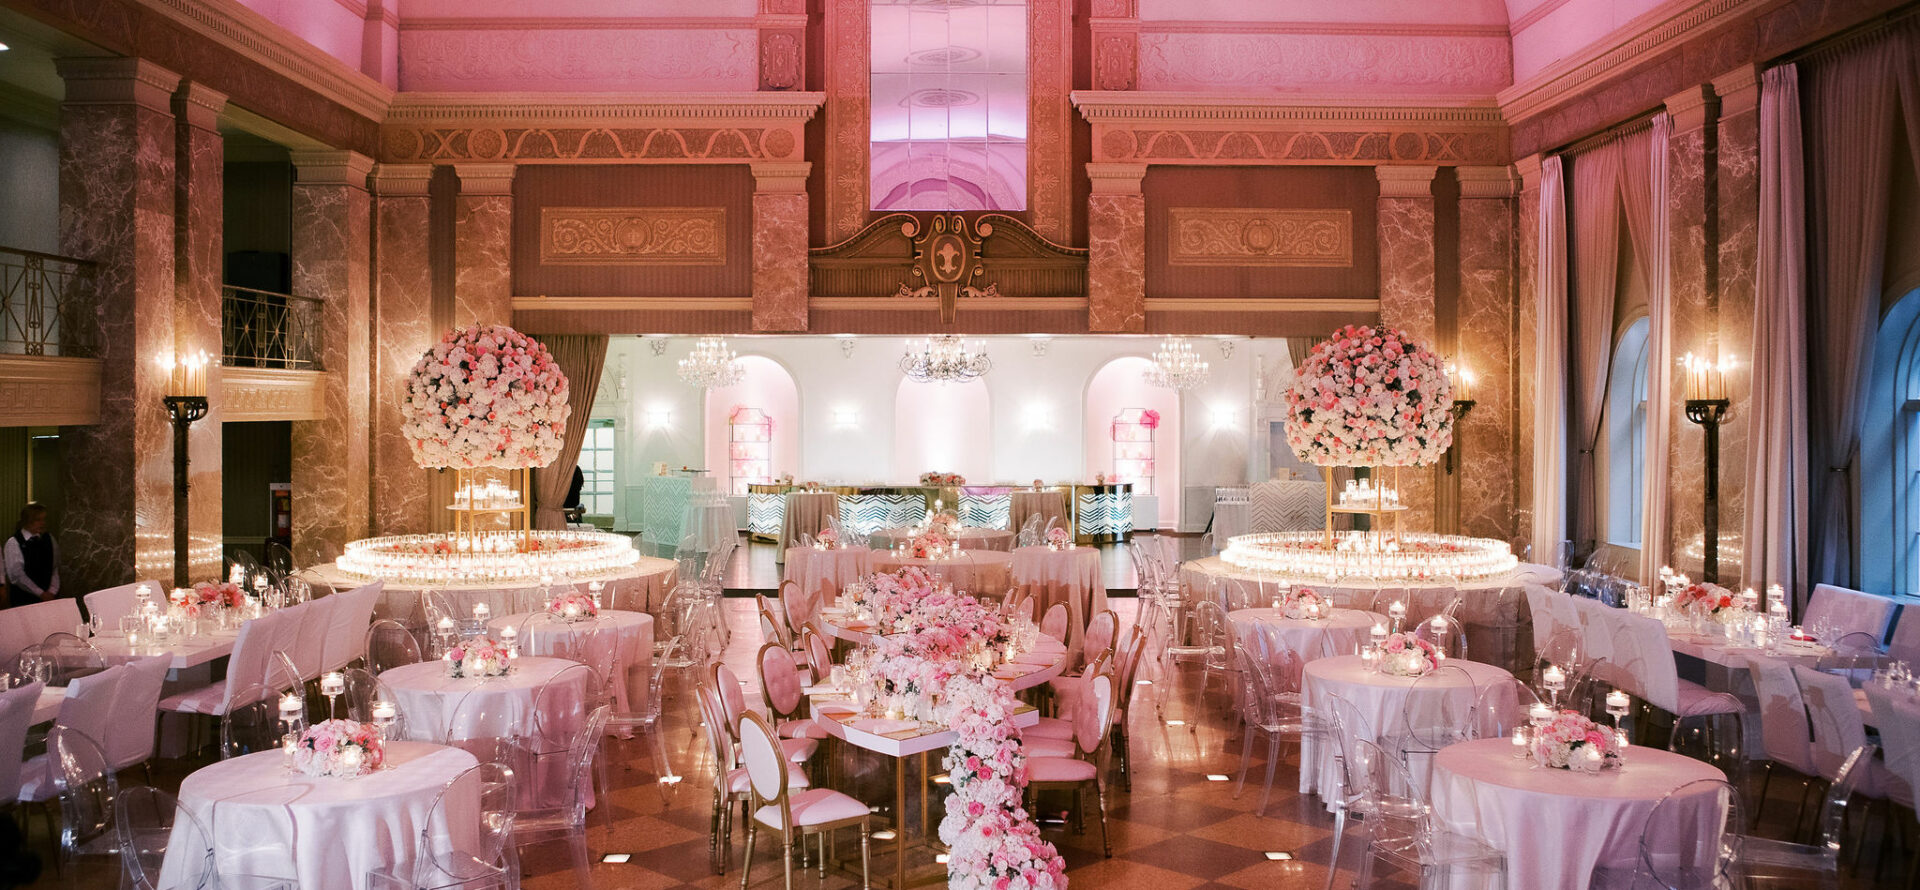 Ballroom with themed tables and lights